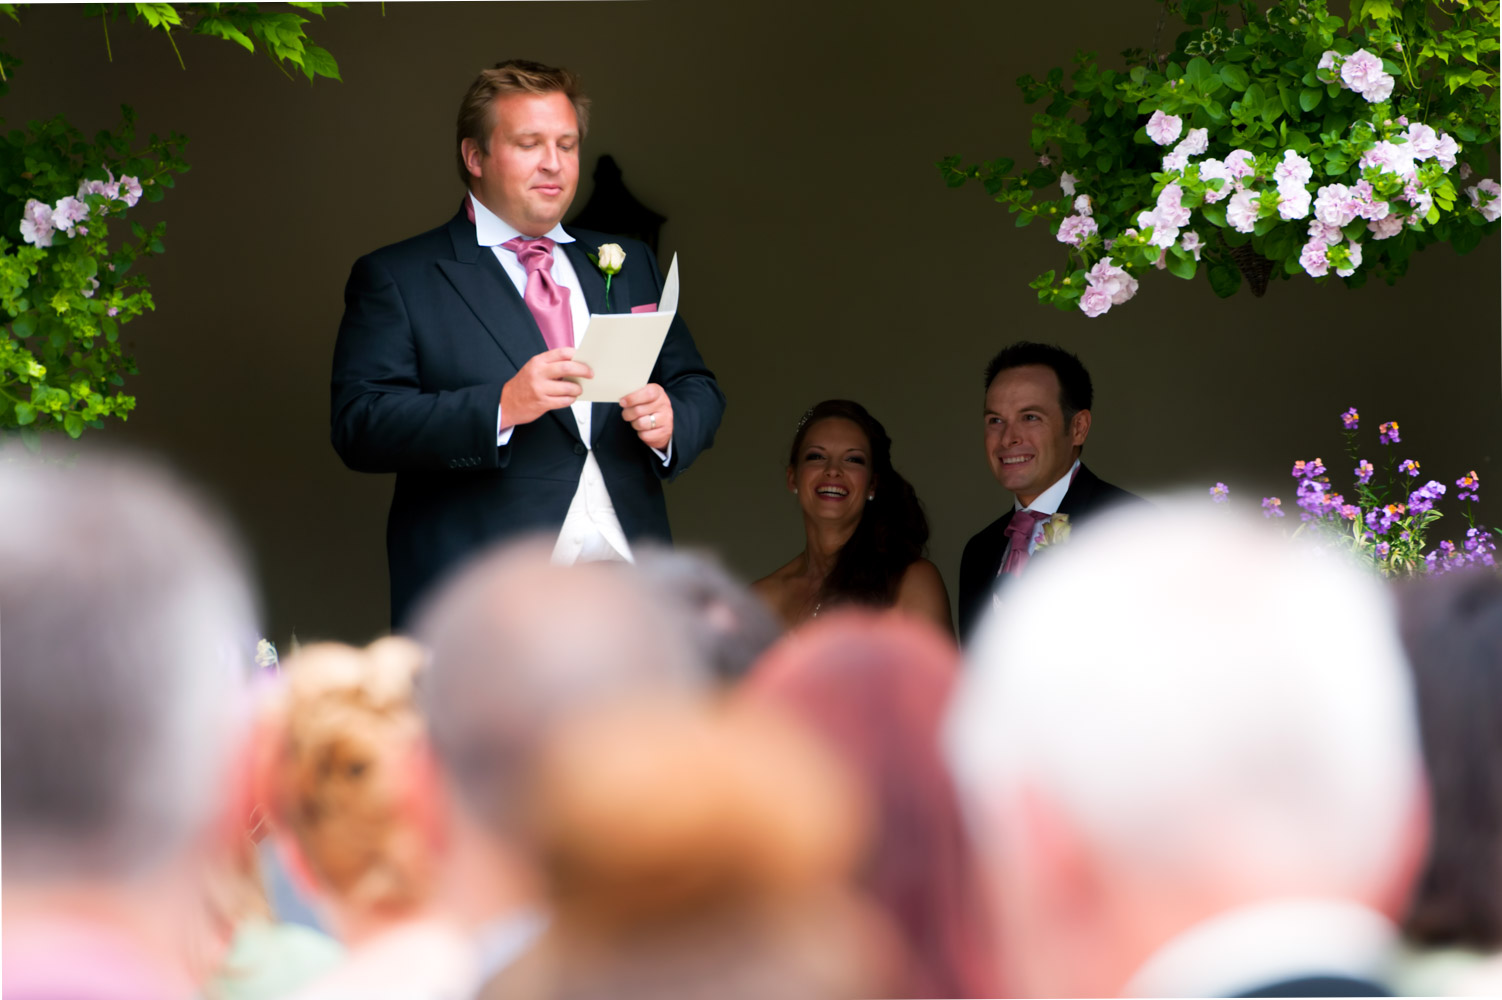 Wedding ceremony at the Ashdown Park Hotel